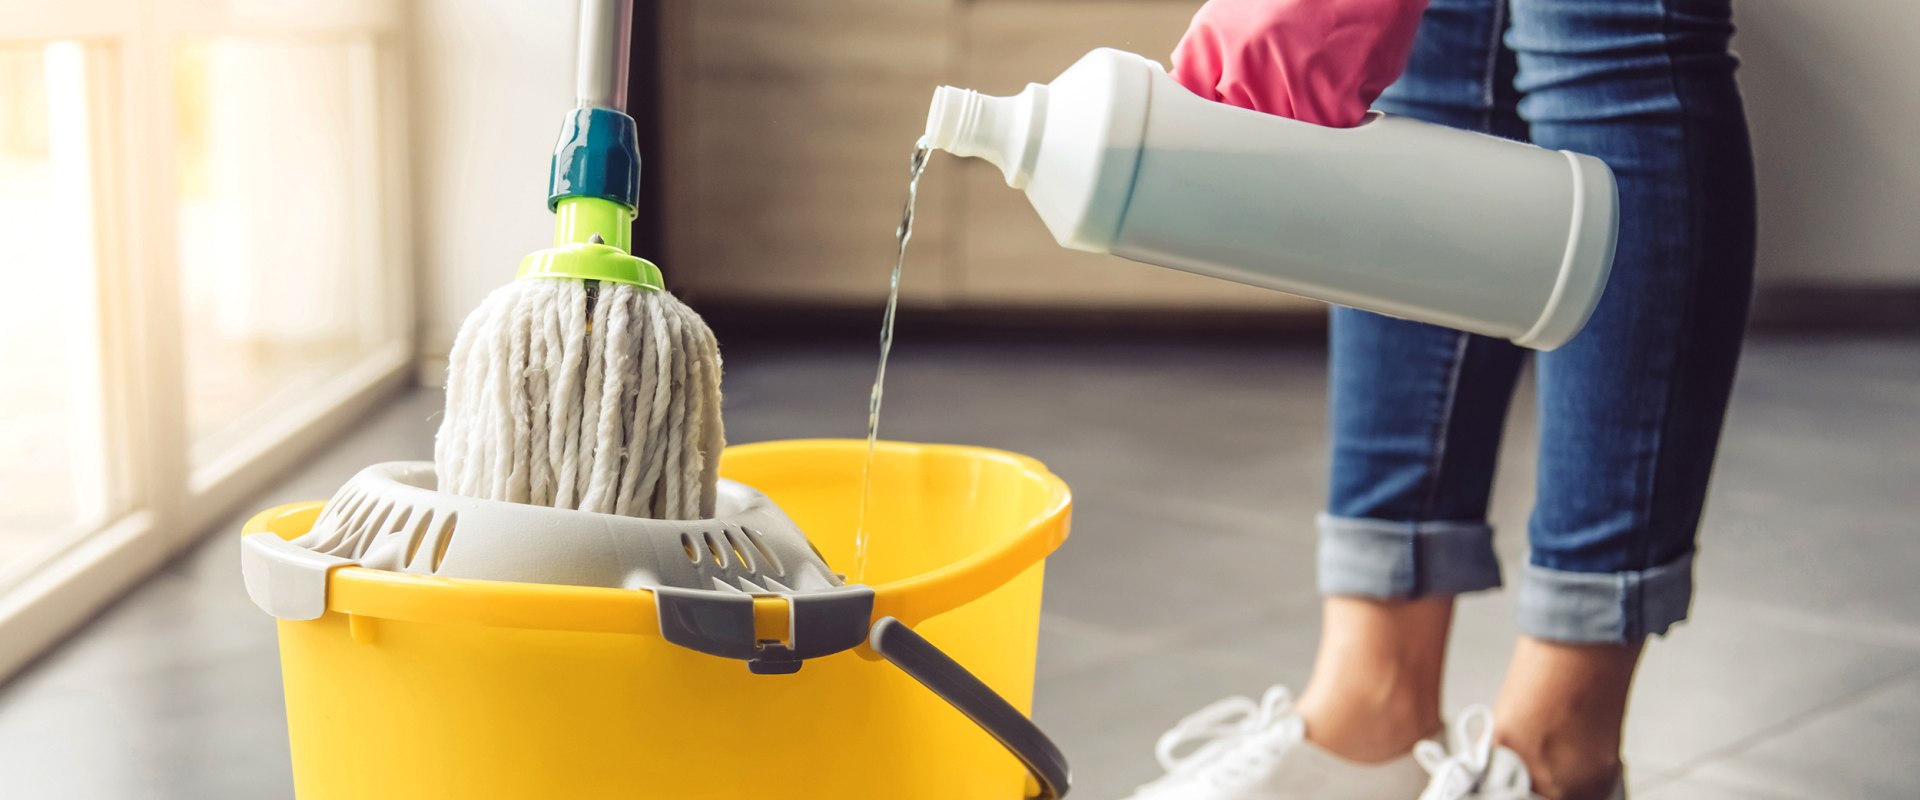 How long should cleaning your house take?